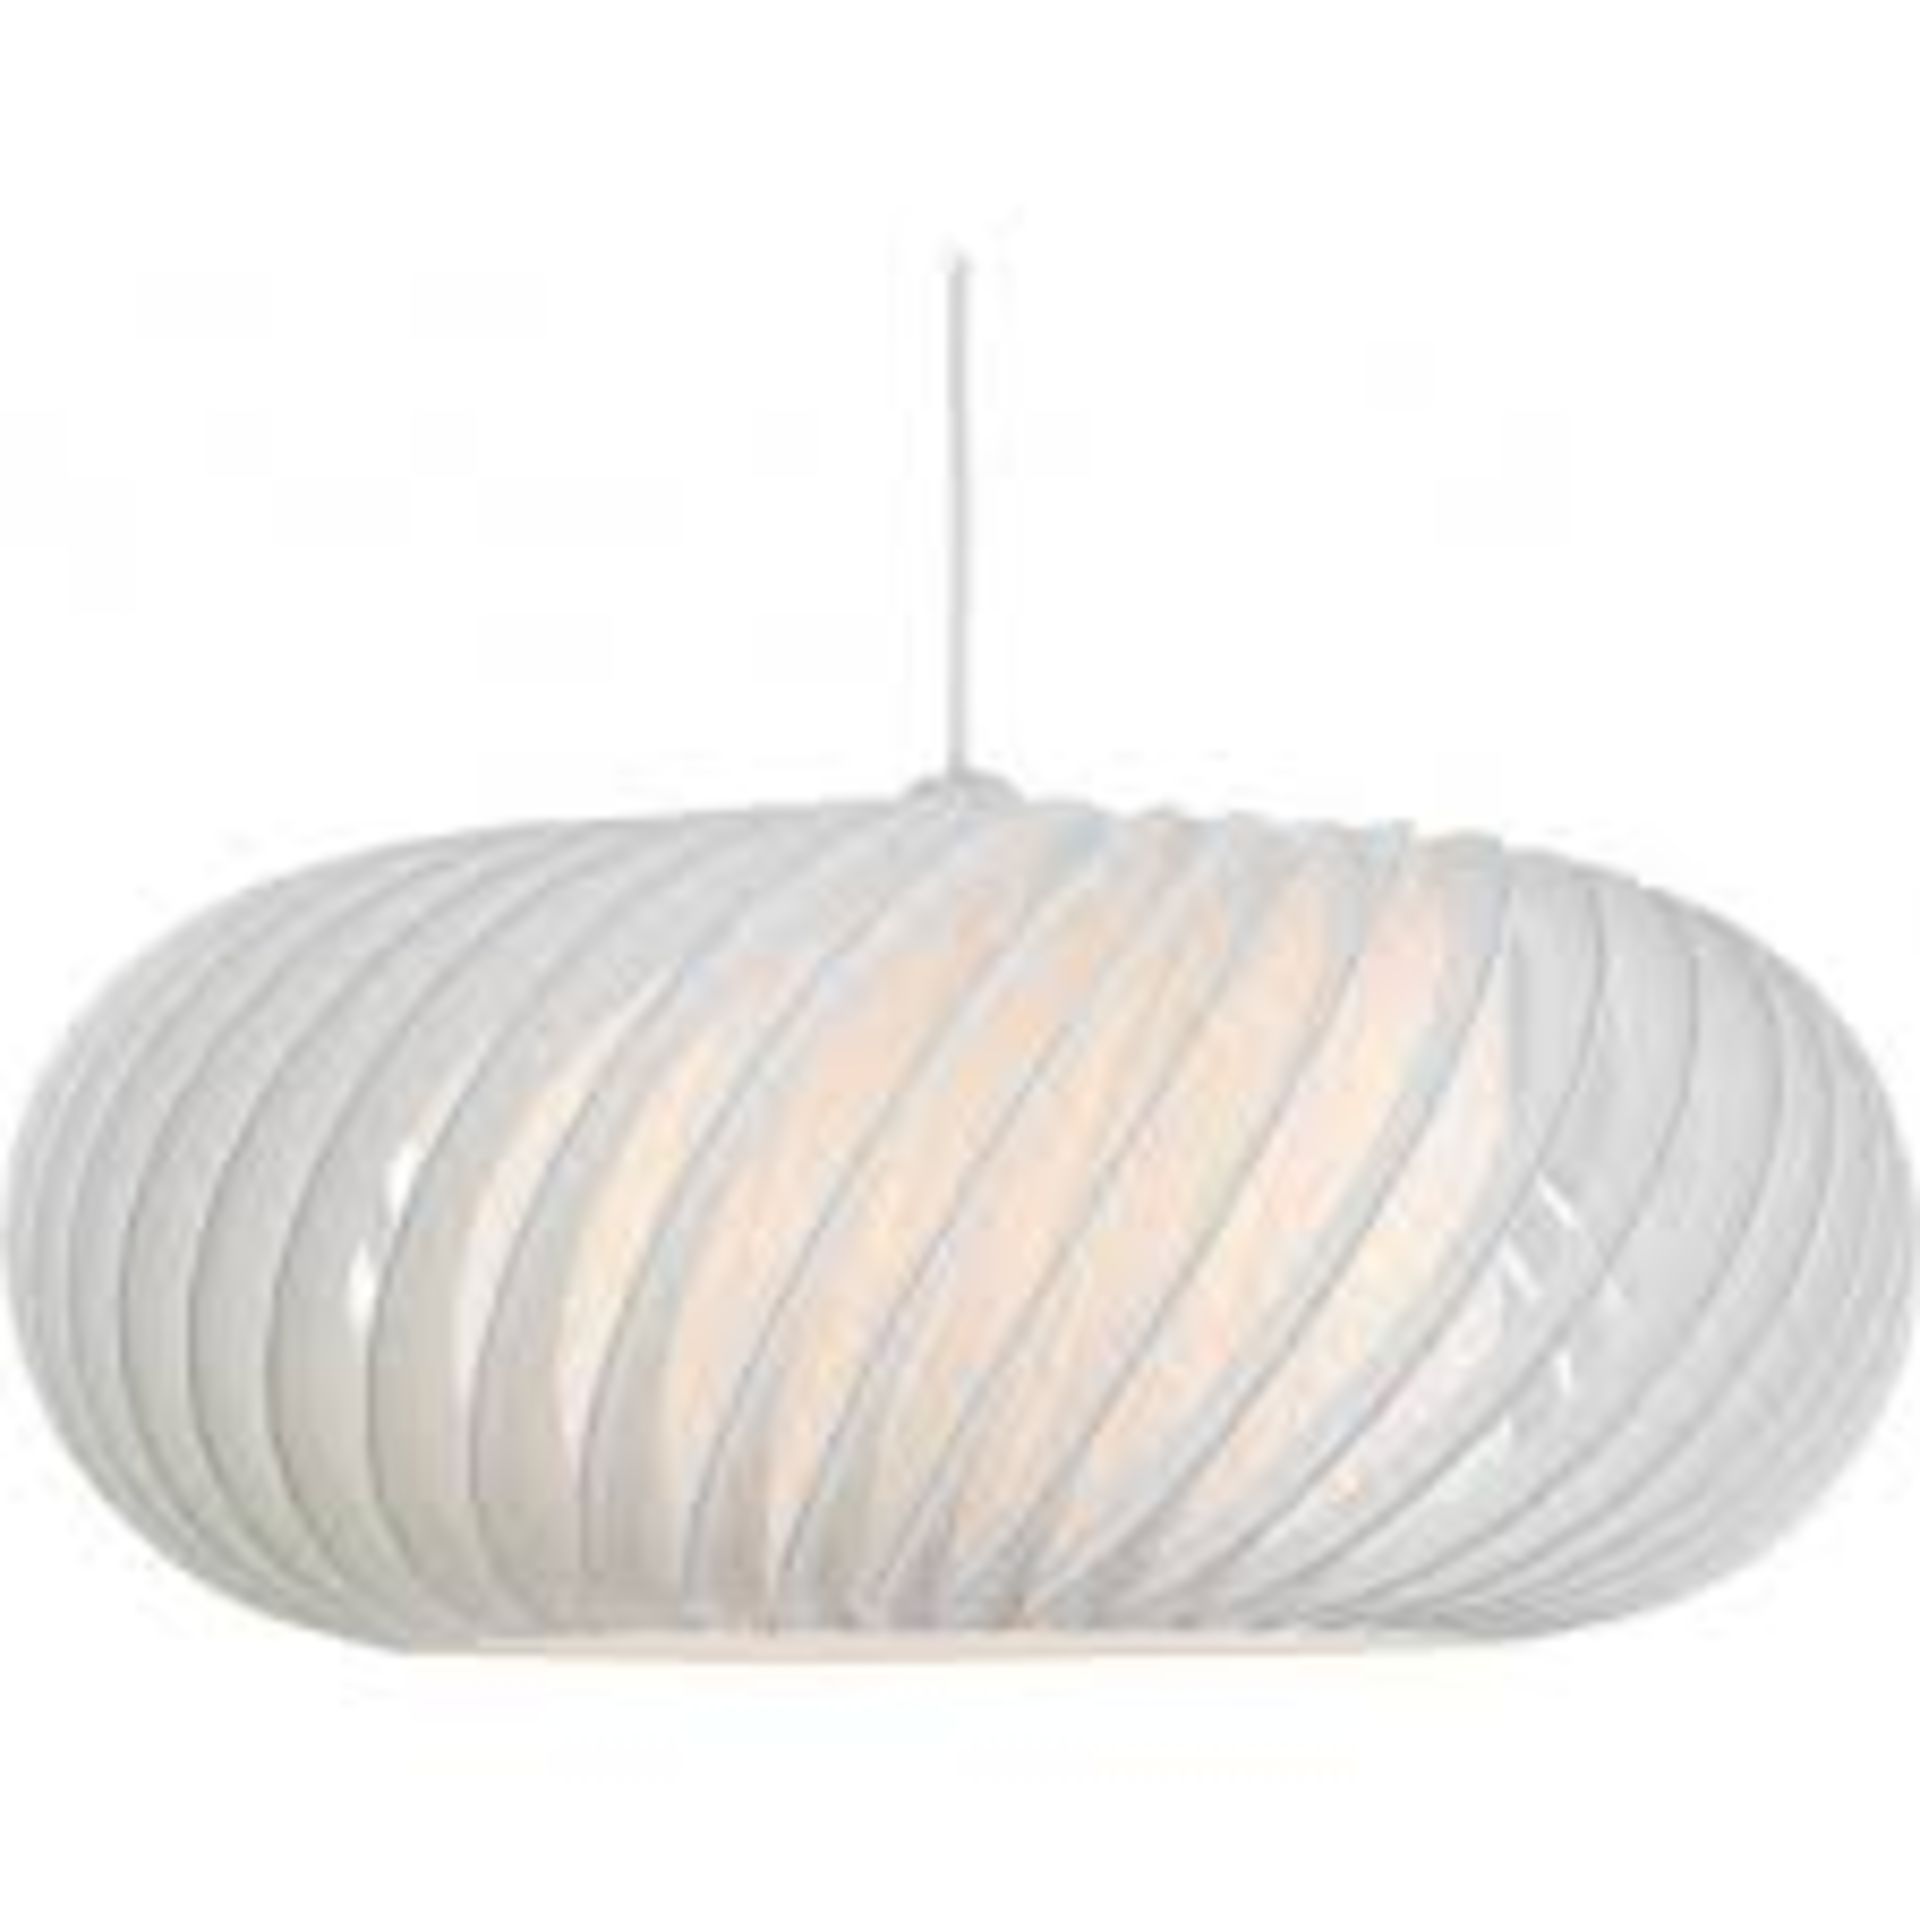 Boxed Darklighting Explorer 50cm Novelty Pendant Shade RRP £60 (10101) (Pictures Are For